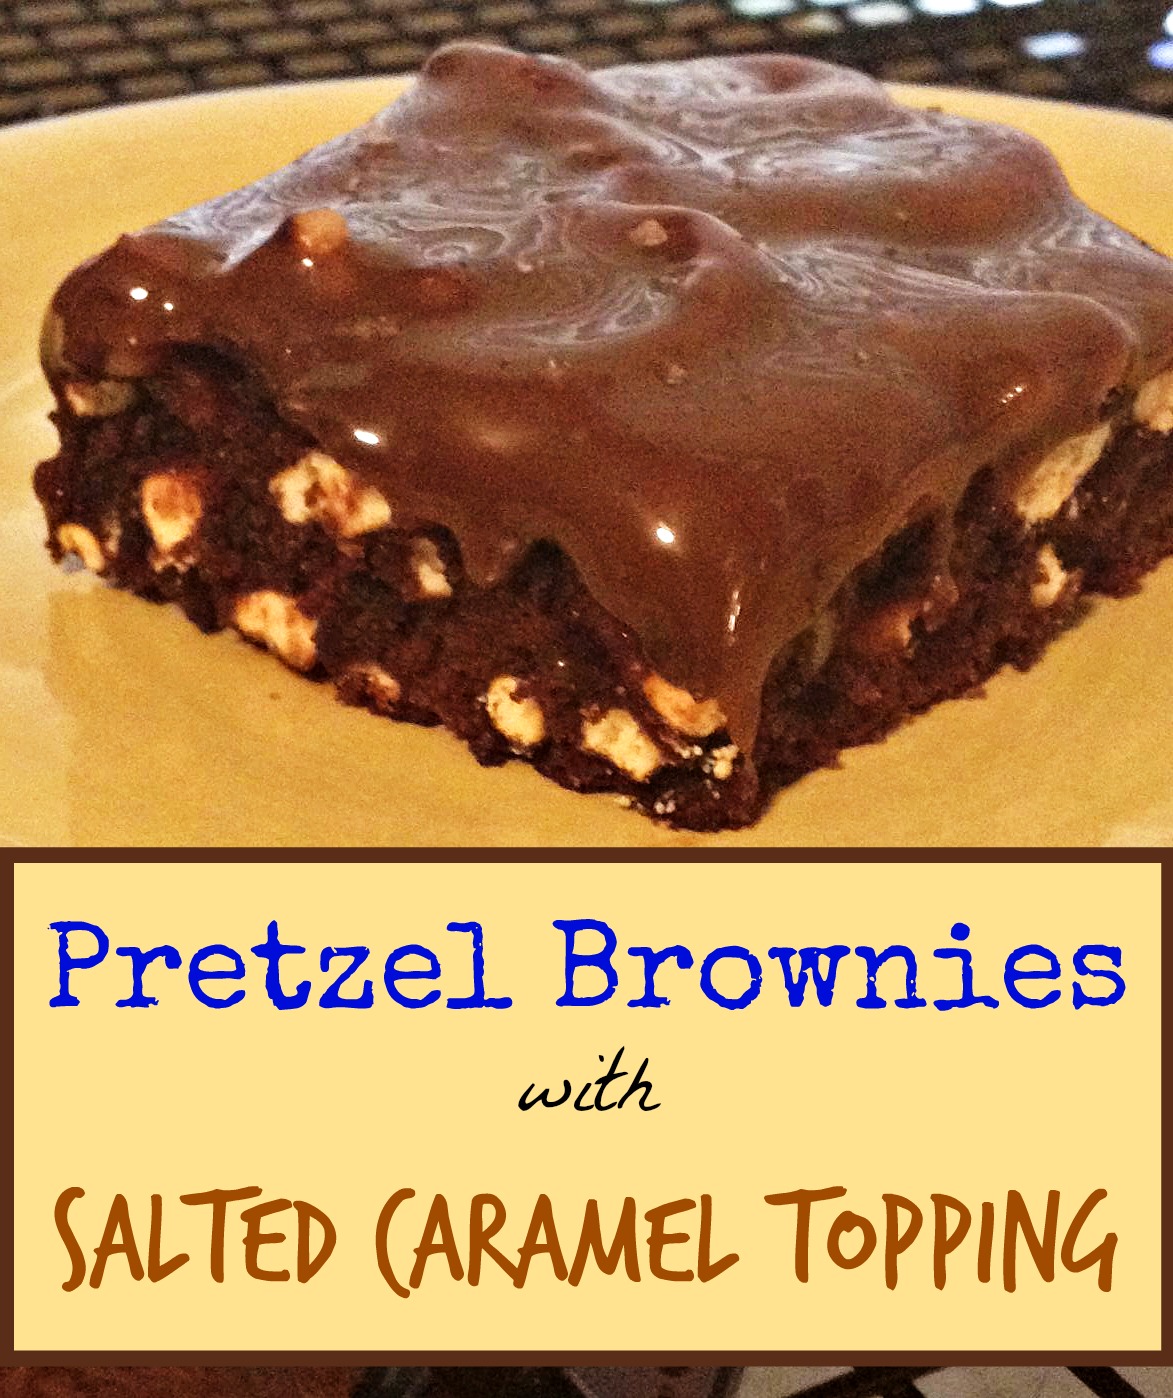 Pretzel Brownies with Salted Caramel Topping